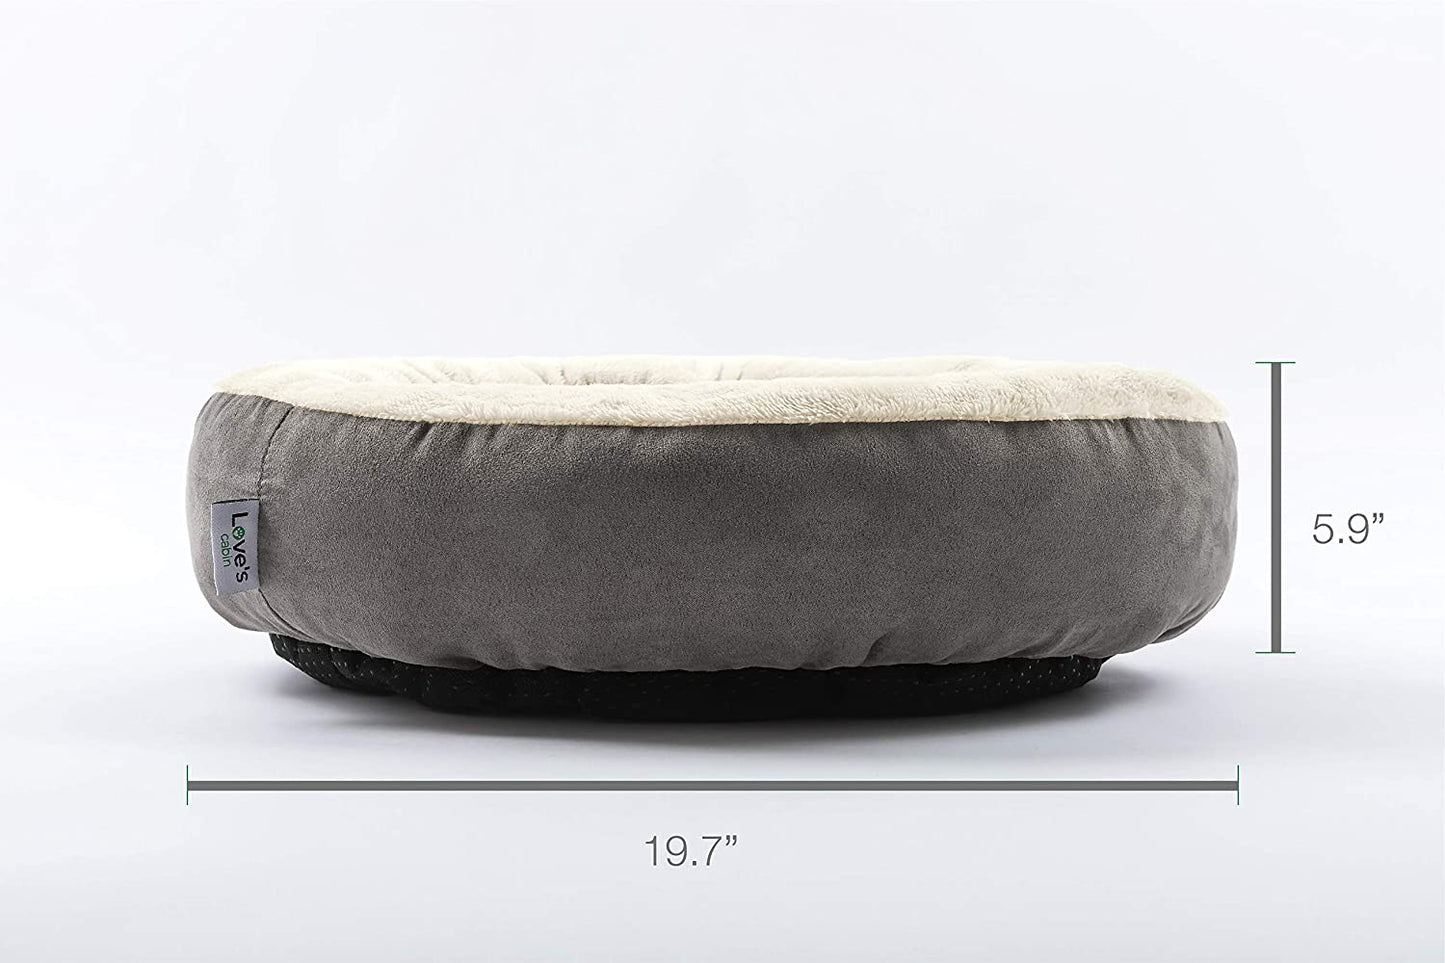 round Donut Cat and Dog Cushion Bed, 20In Pet Bed for Cats or Small Dogs, Anti-Slip & Water-Resistant Bottom, Super Soft Durable Fabric Pet Supplies, Machine Washable Luxury Cat & Dog Bed